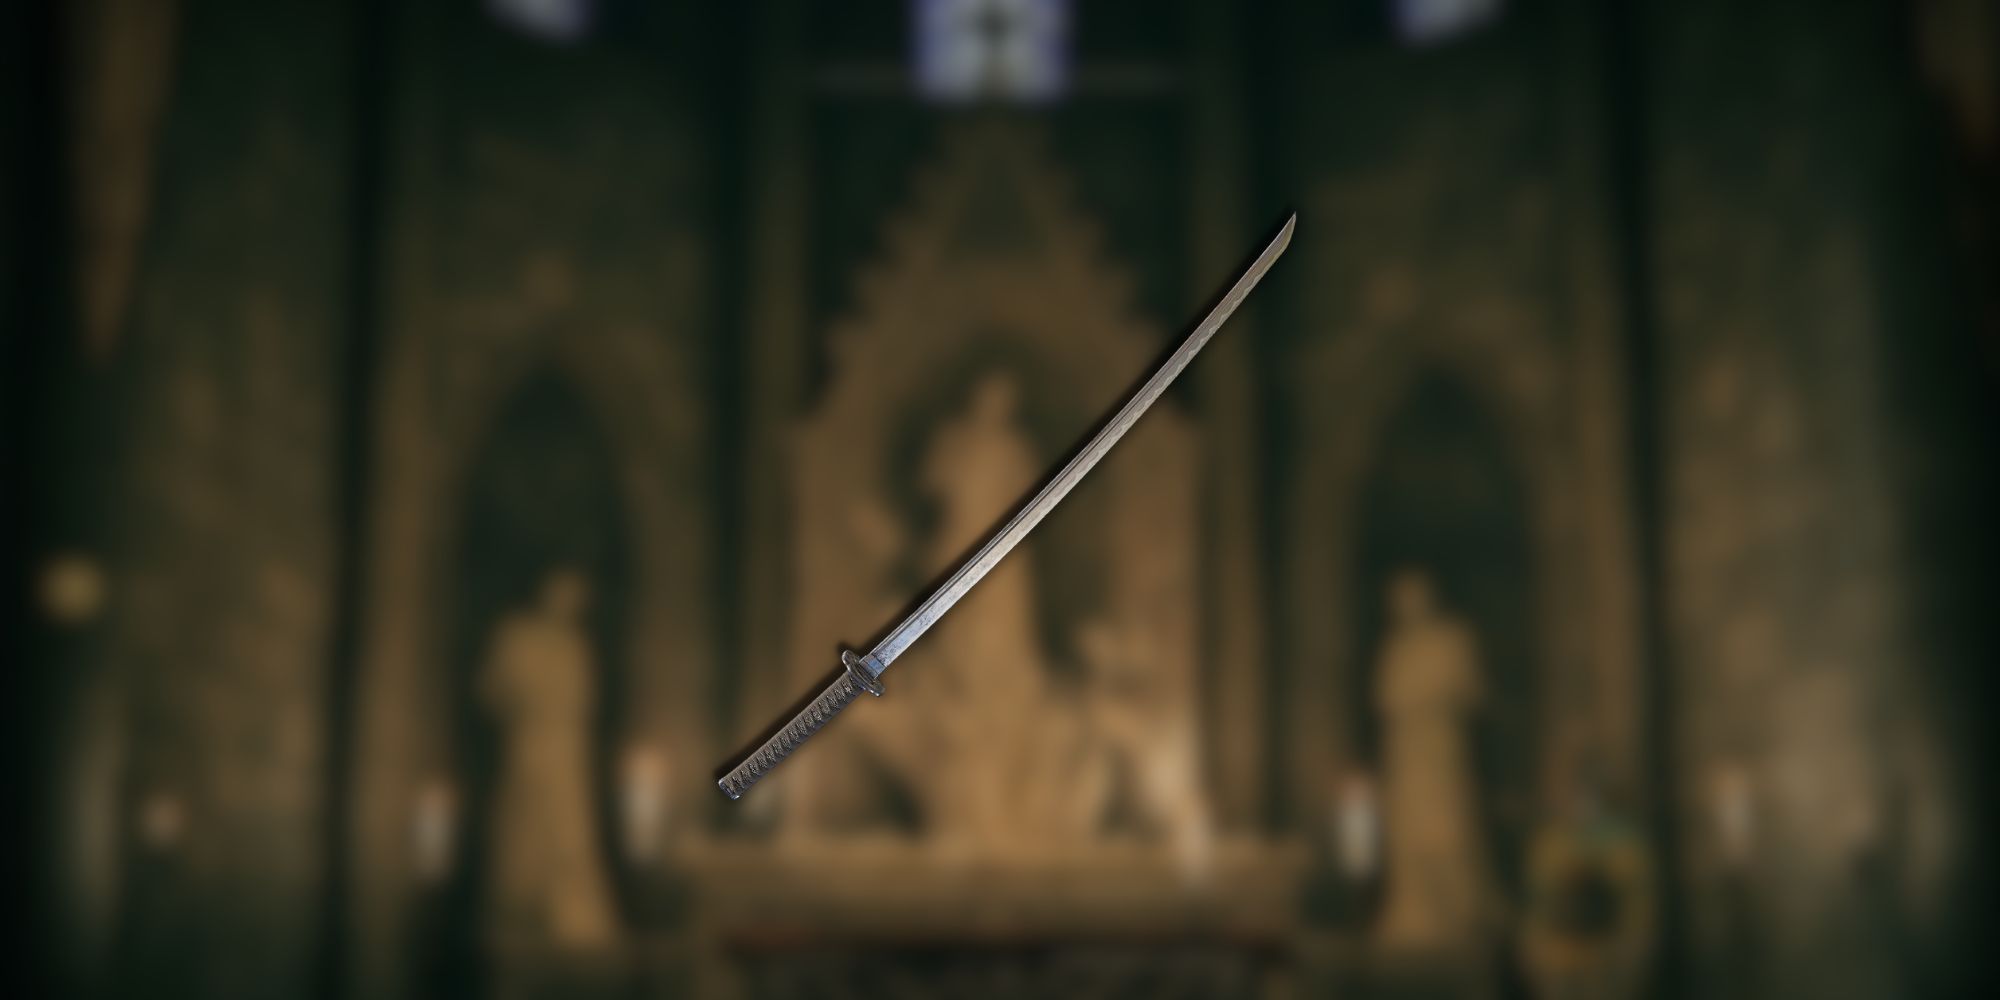 A plain looking, steel katana overlayed over a blurred background.